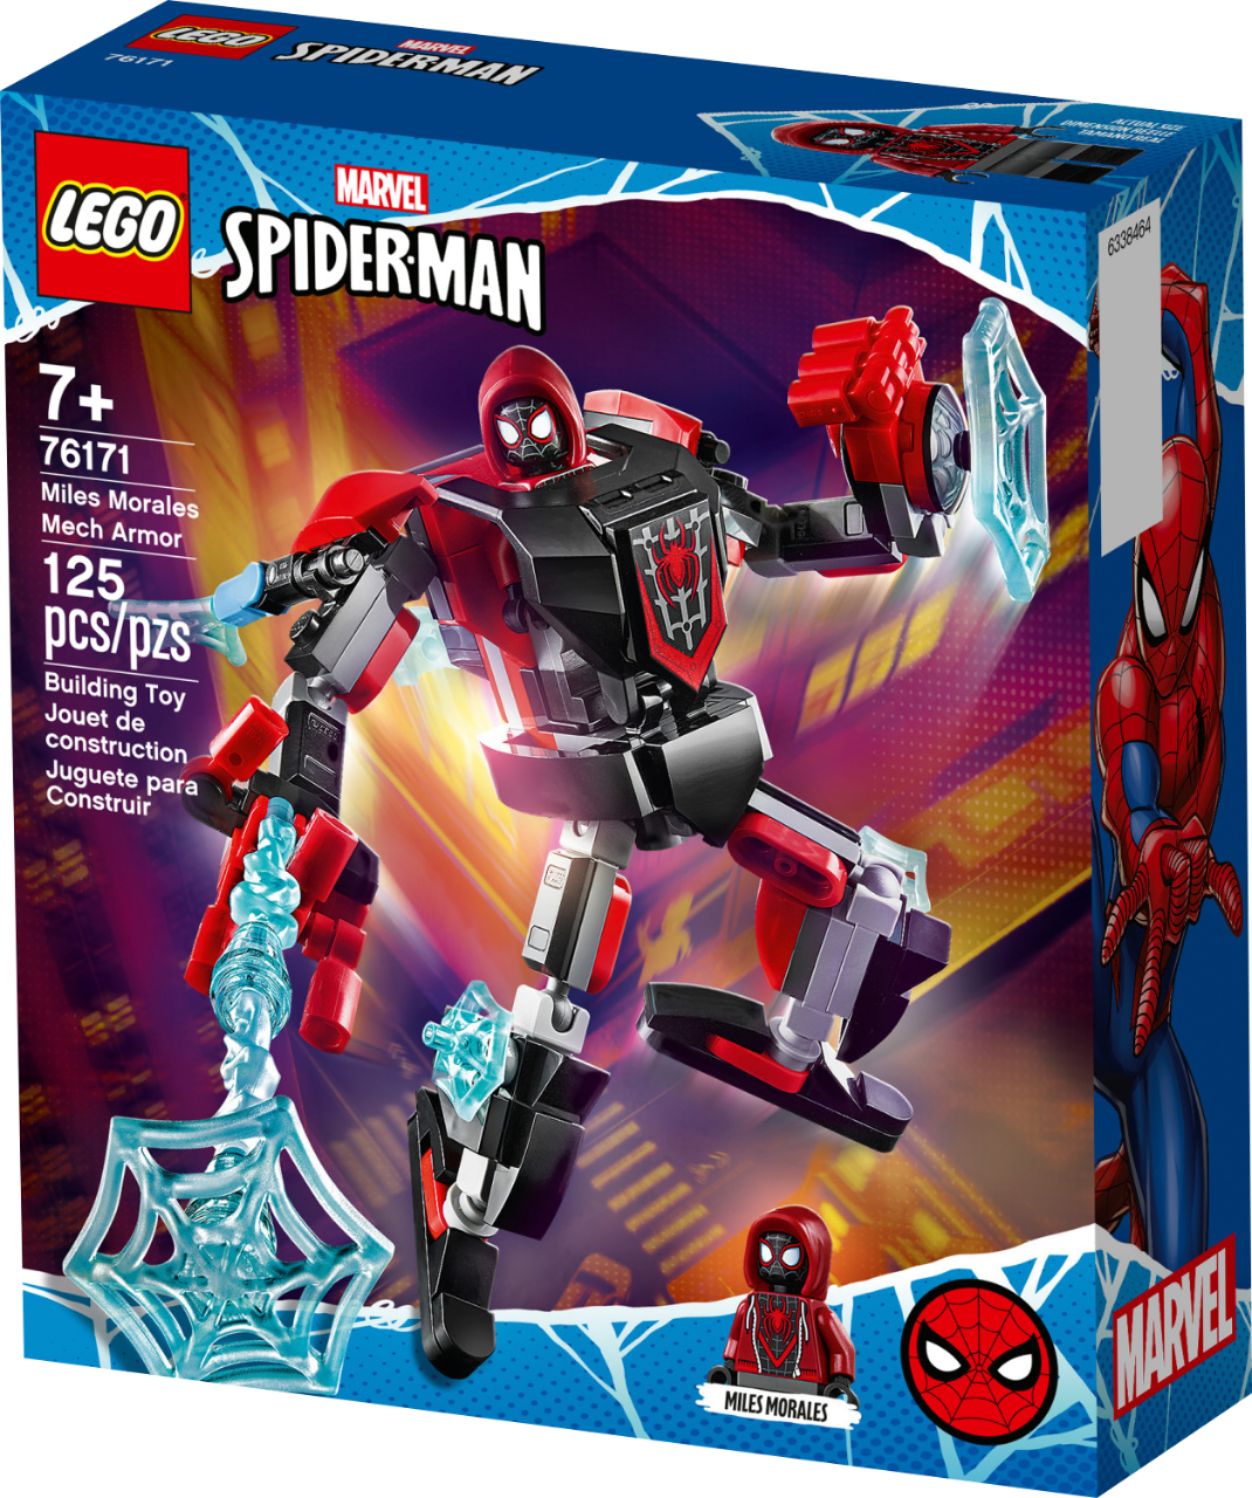 ACC NEW Lego Miles Morales Mech Armour Spiderman 76171 